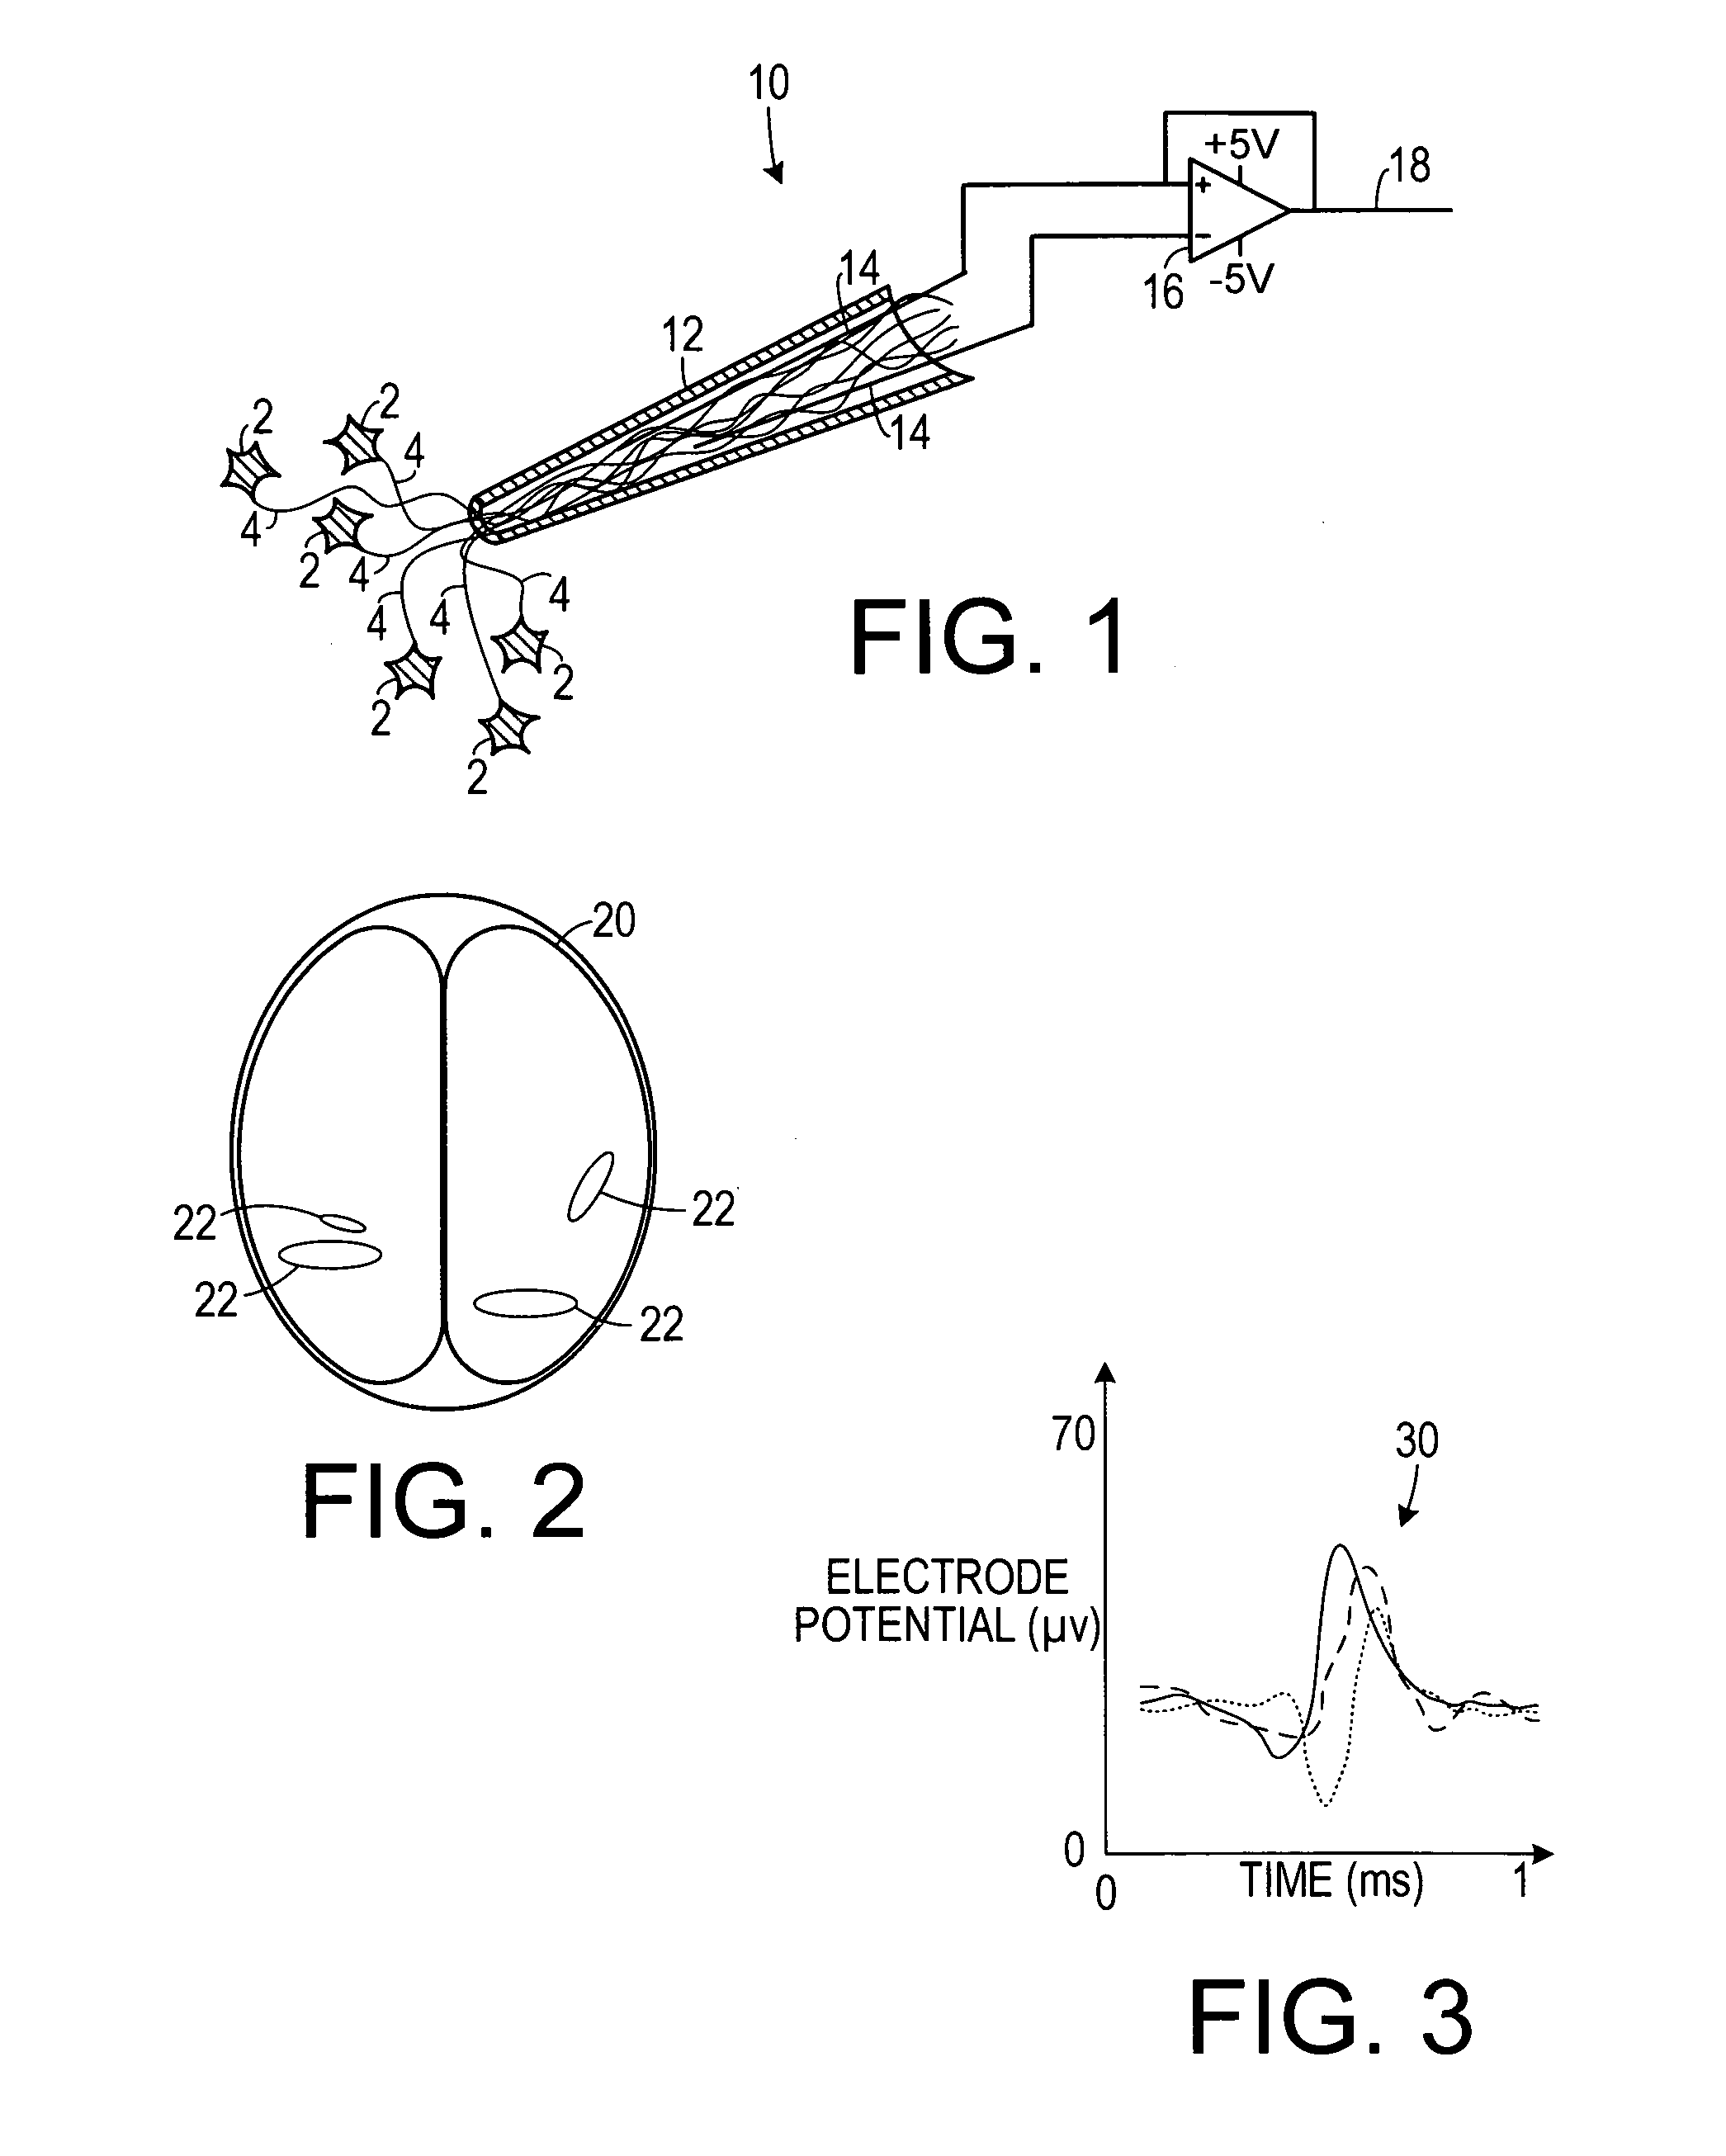 System and method for speech generation from brain activity